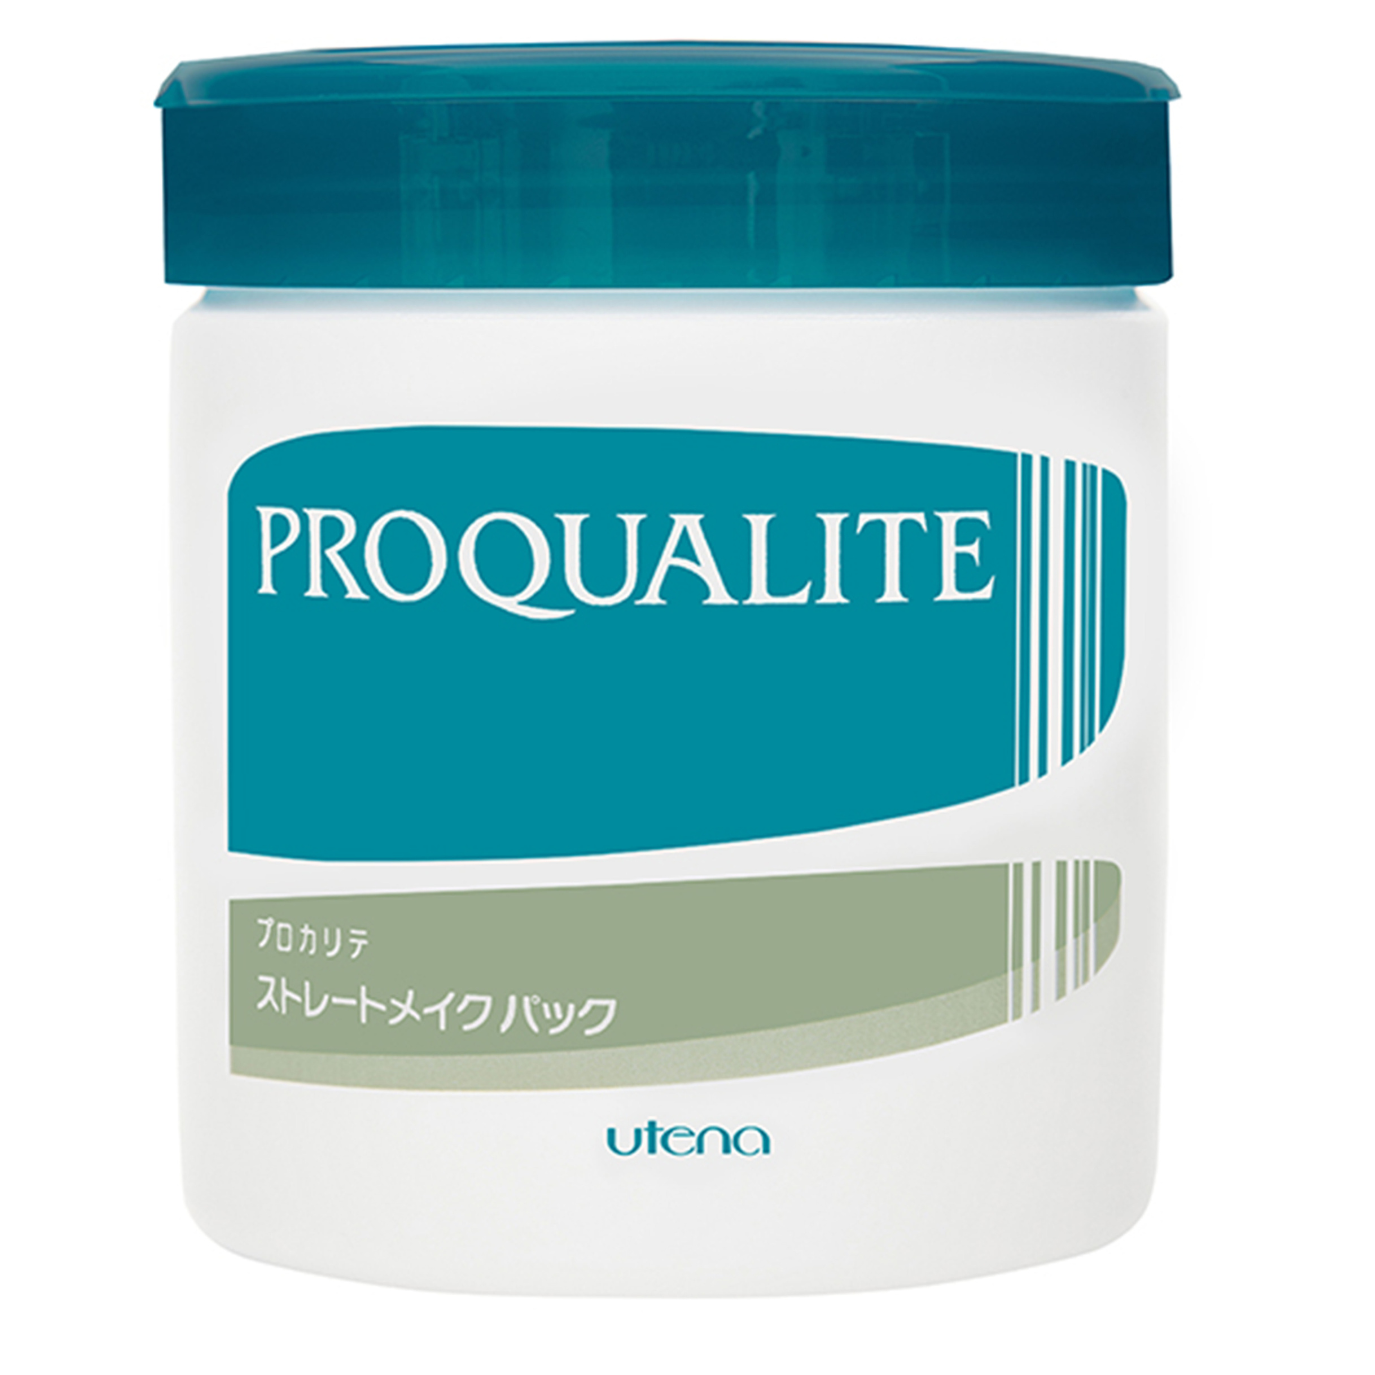 Utena PROQUALITE Straight Make Pack Large - 440g - Harajuku Culture Japan - Japanease Products Store Beauty and Stationery